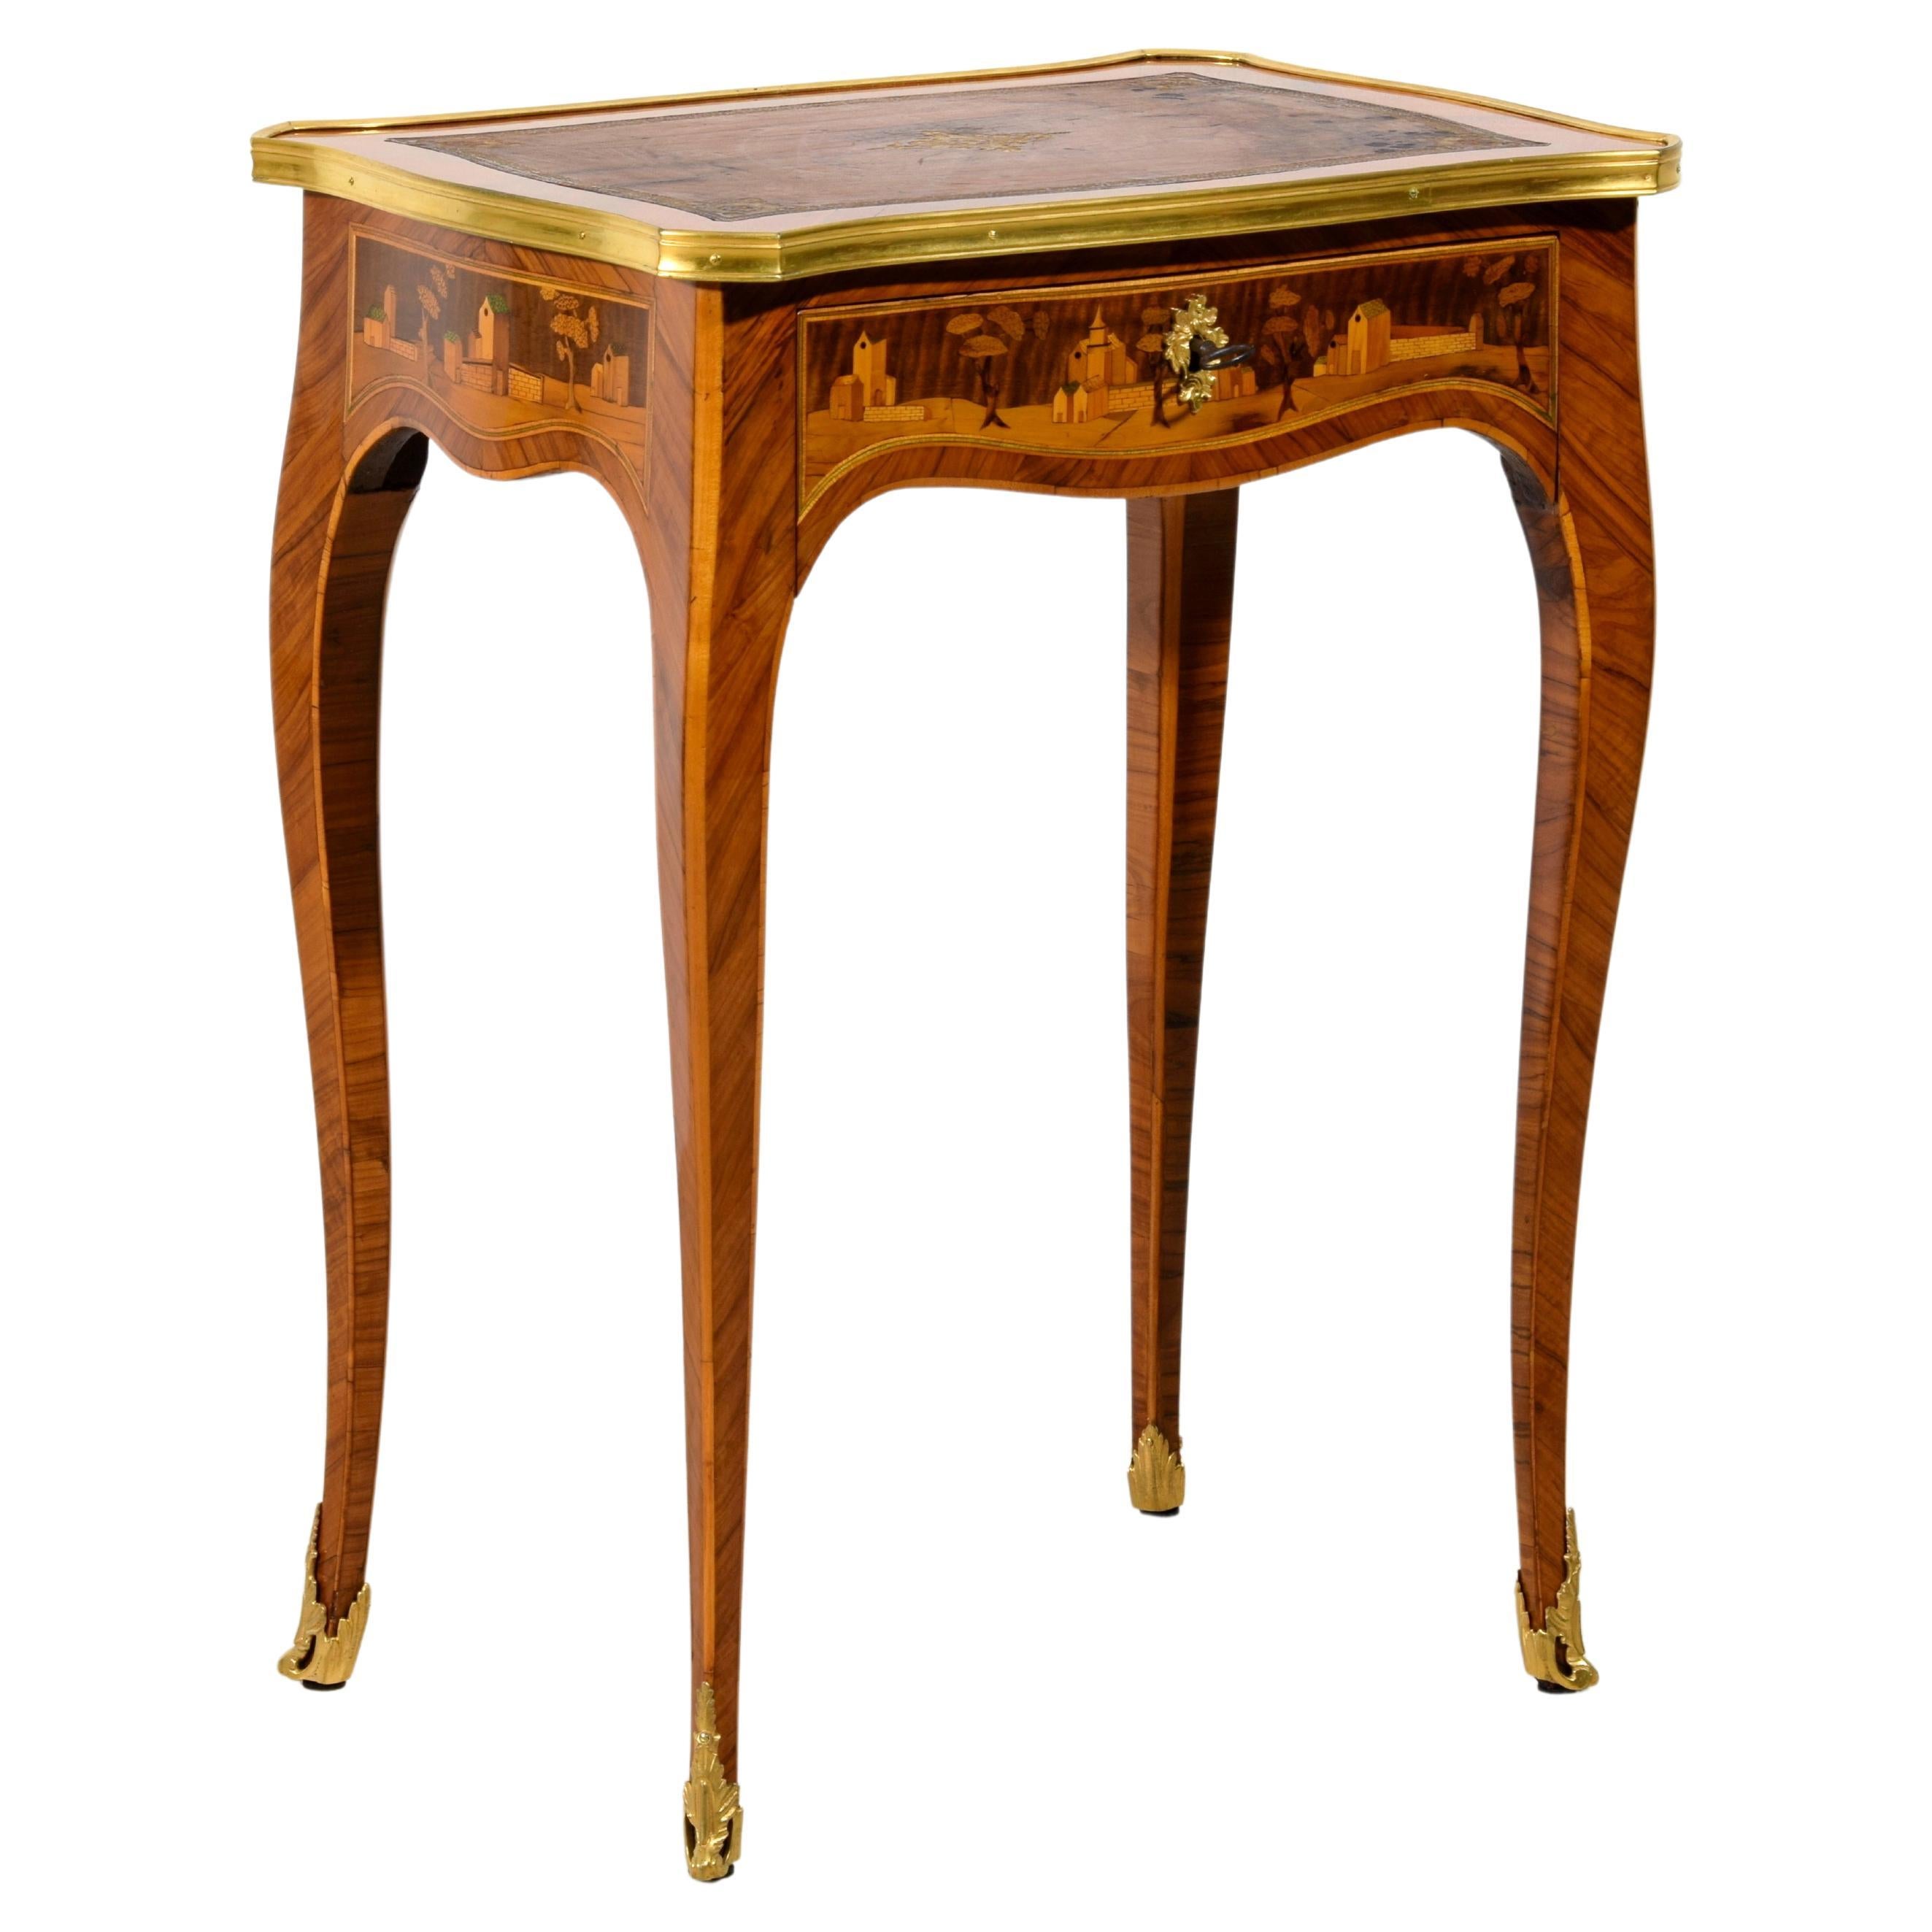 19th Century, France Inlaid Wood Centre Table For Sale